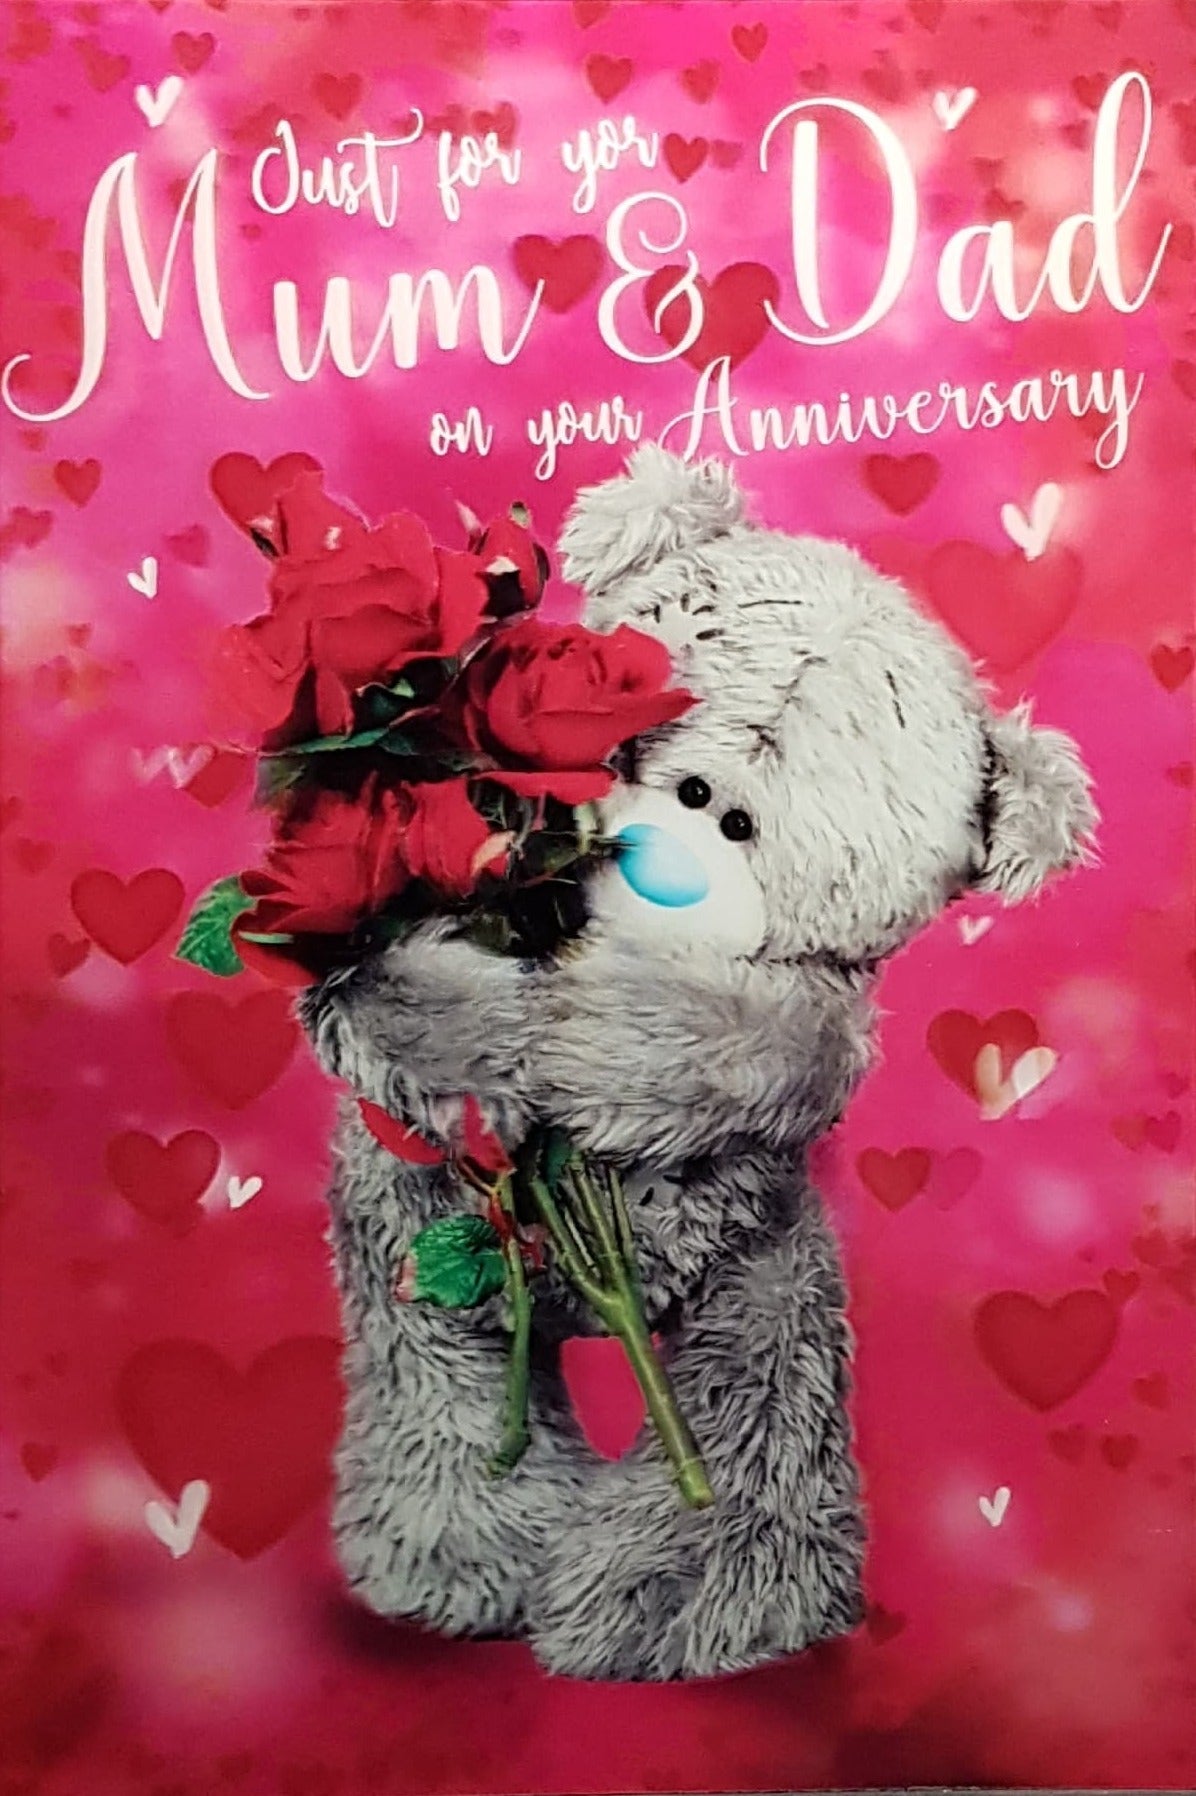 Anniversary Card - Mum & Dad / A Cute Teddy Holding A Bunch Of Red Roses (3D Card)